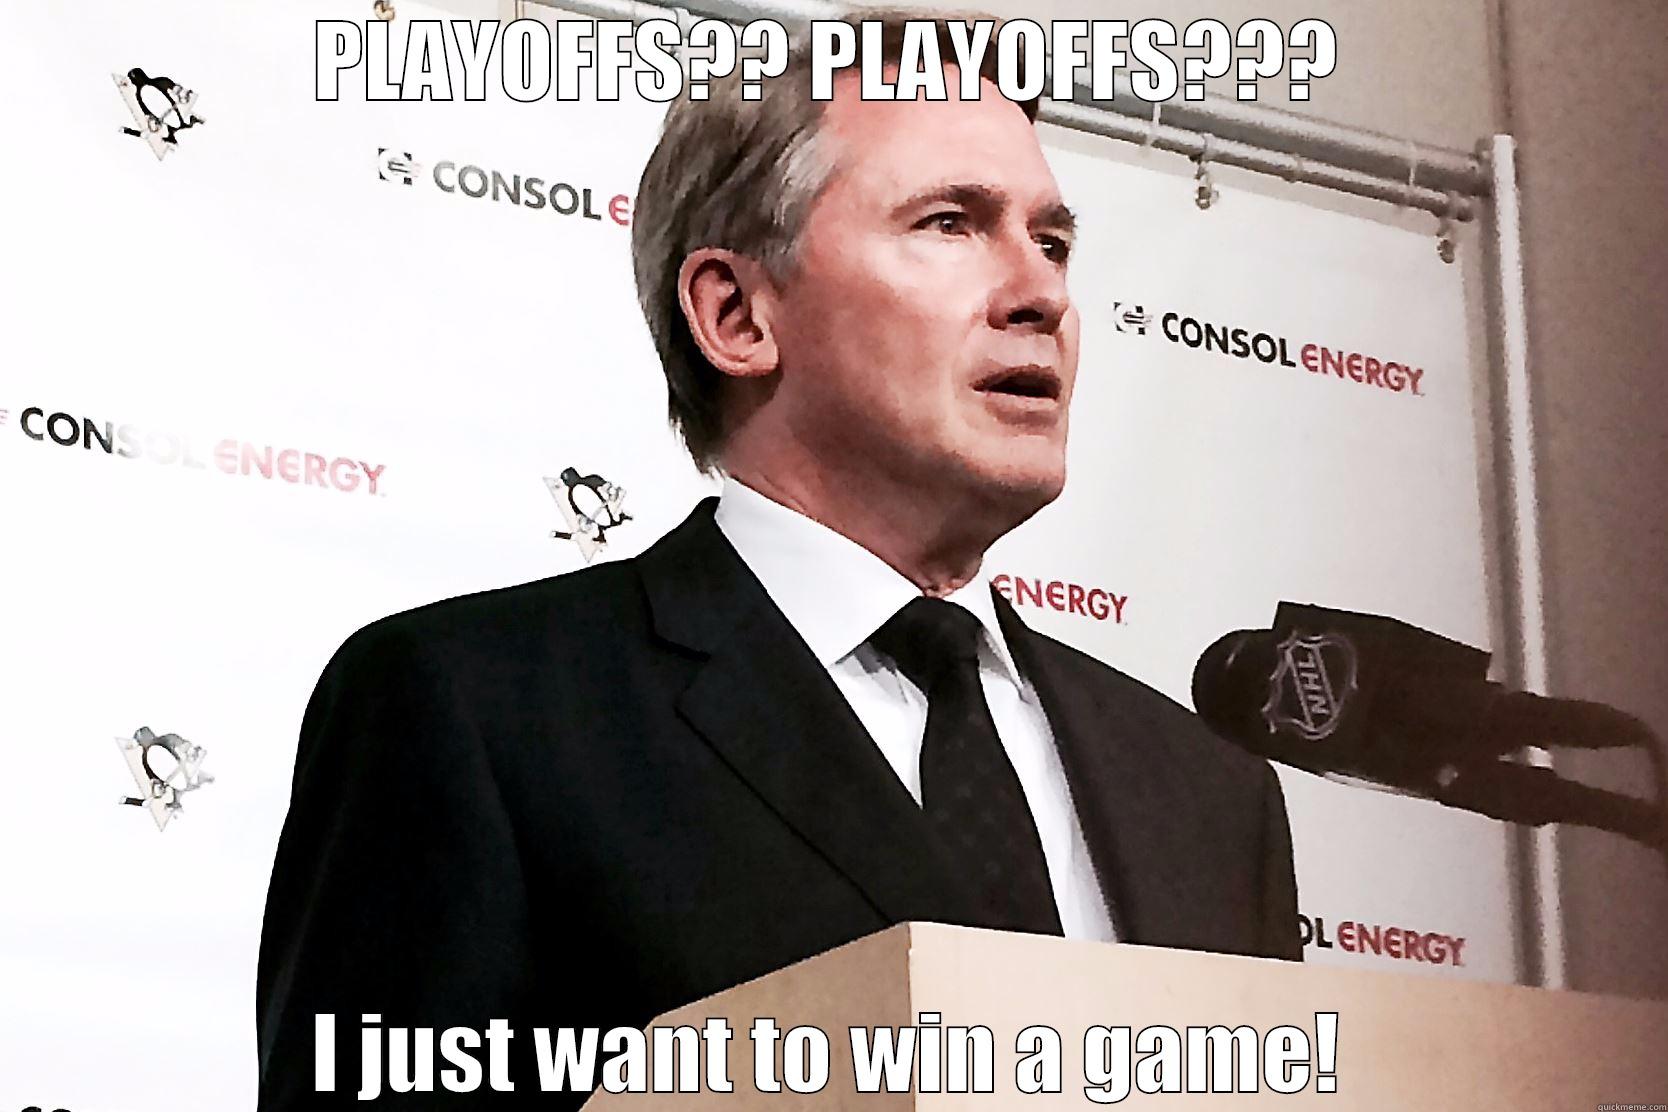 Playoff goof - PLAYOFFS?? PLAYOFFS??? I JUST WANT TO WIN A GAME! Misc